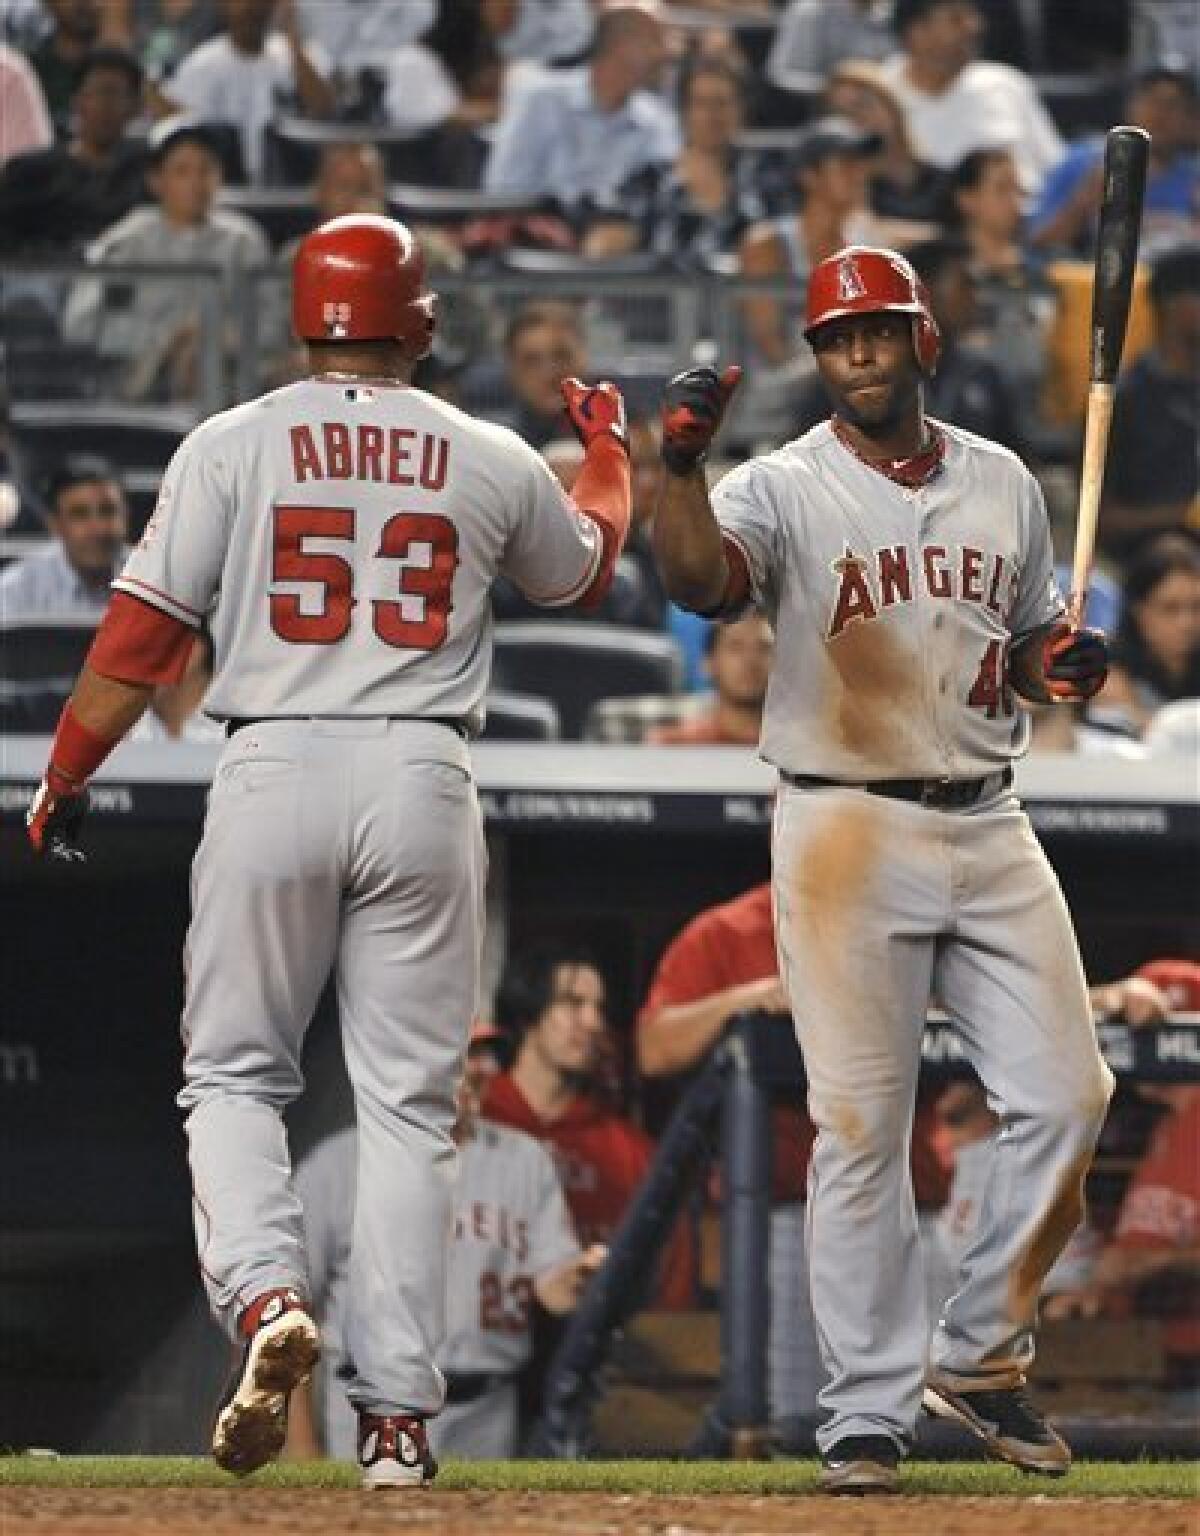 Abreu homers off Rivera in 9th, Angels beat Yanks - The San Diego